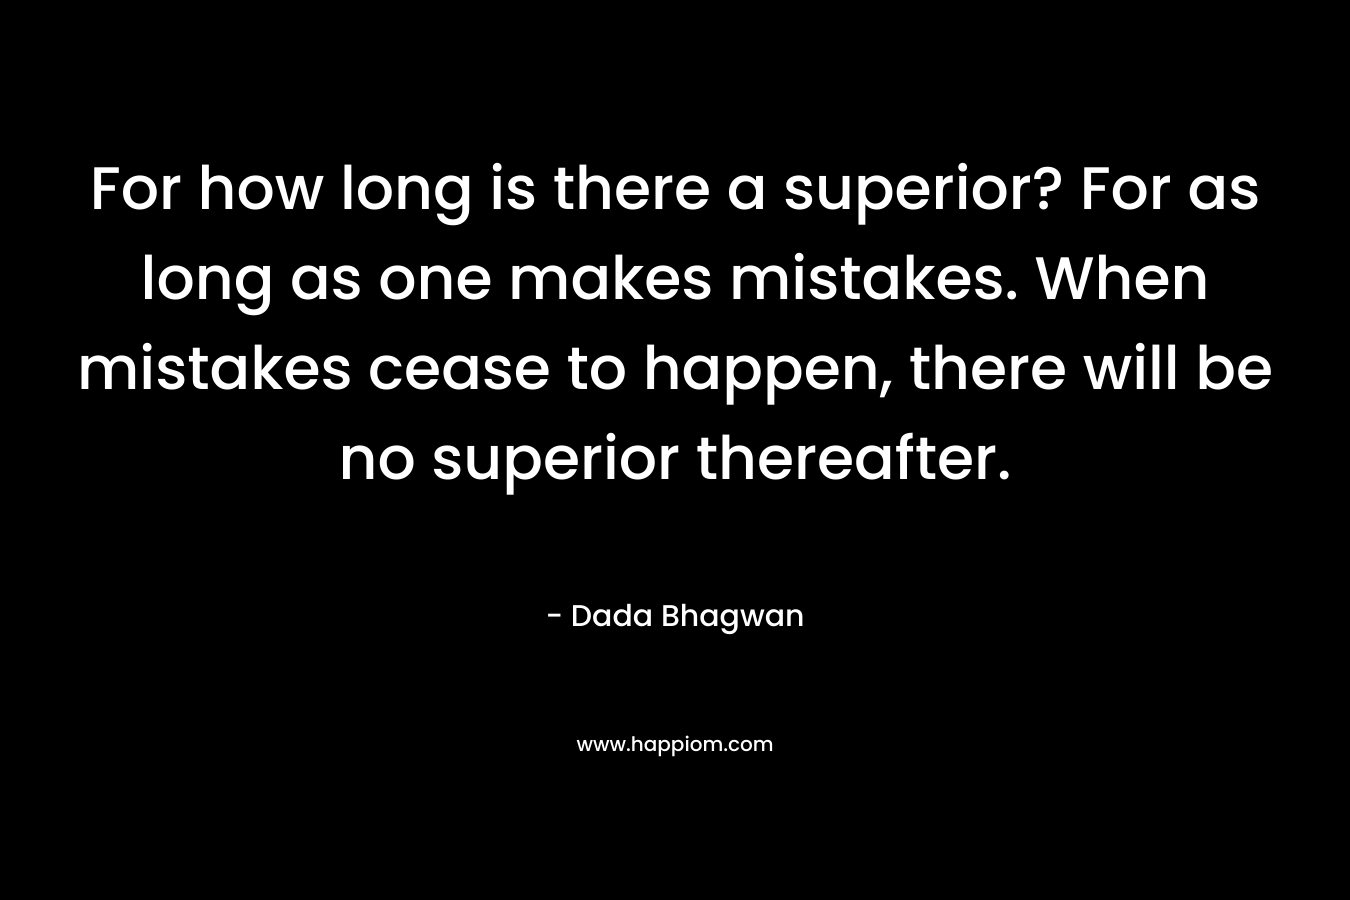 For how long is there a superior? For as long as one makes mistakes. When mistakes cease to happen, there will be no superior thereafter. – Dada Bhagwan